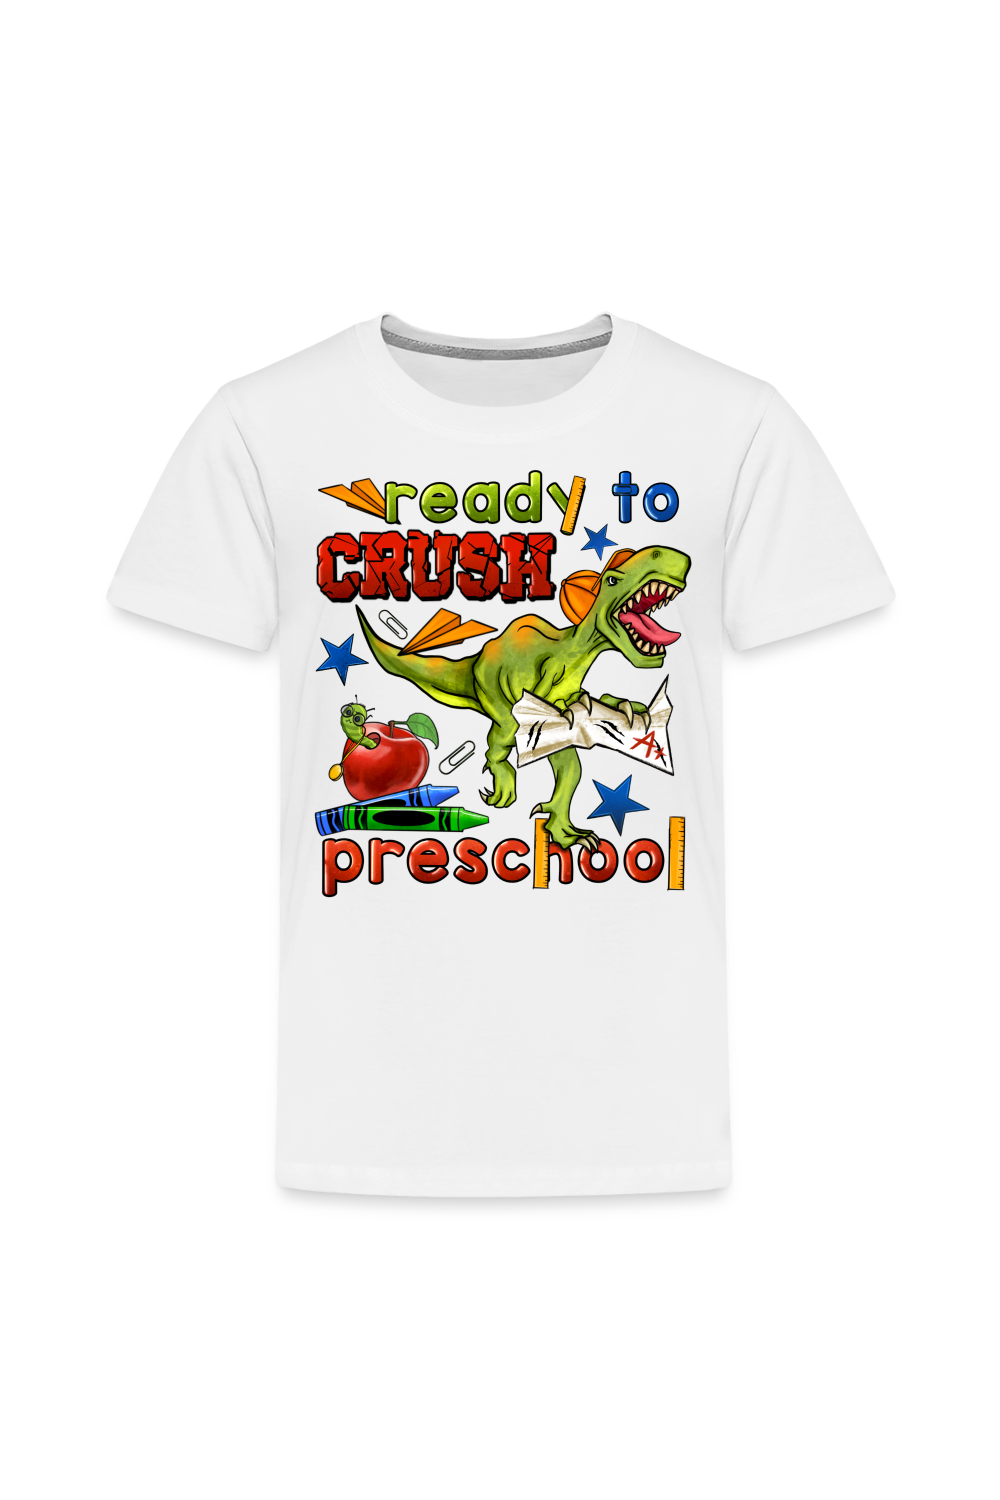 Toddler Boys Ready To Crush Preschool Short Sleeve Tee Shirt for Back To School - white / NicholesGifts.online